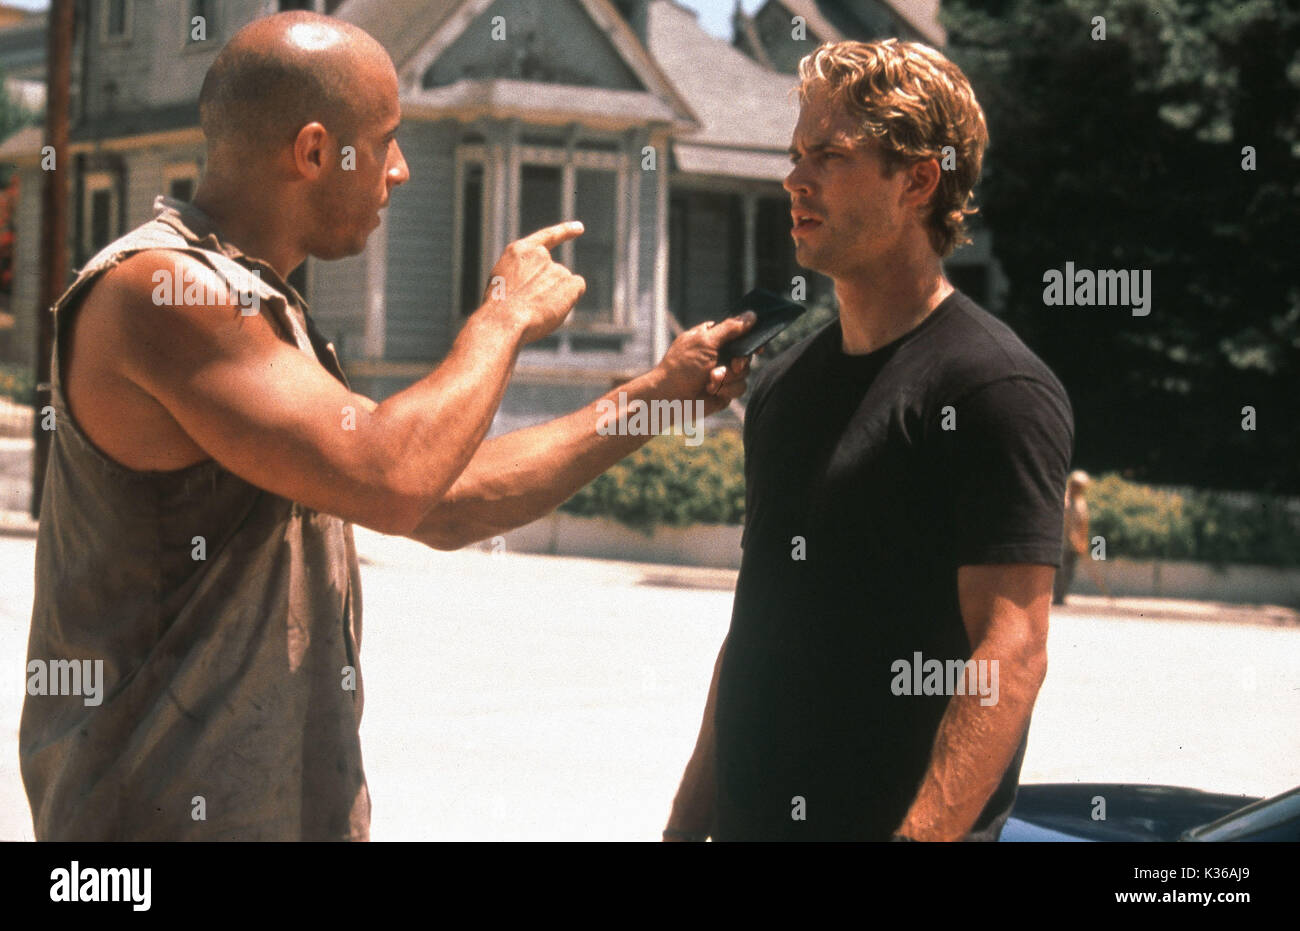 THE FAST AND THE FURIOUS PAUL WALKER AND VIN DIESEL A UNIVERSAL FILM     Date: 2001 Stock Photo